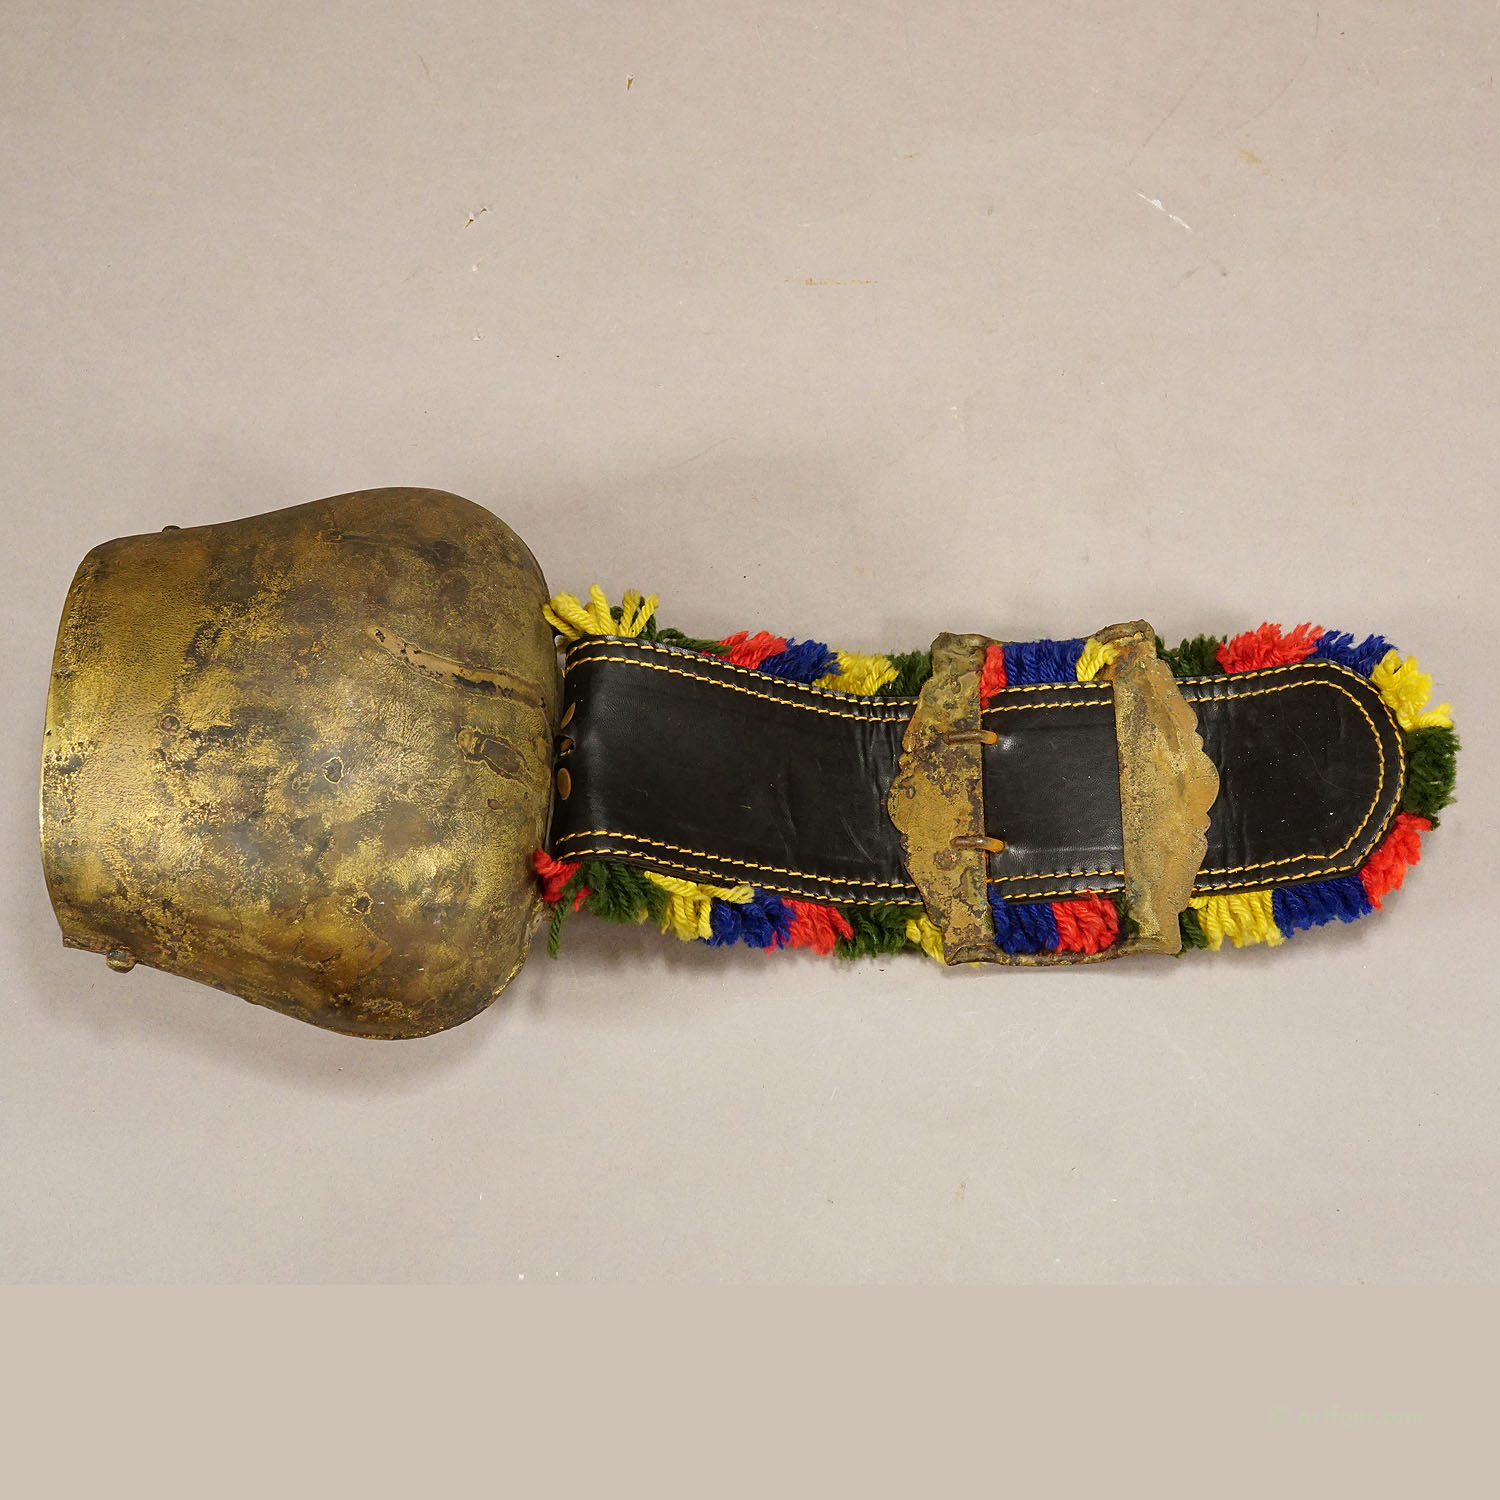 Vintage Swiss Alpine Cattle Bell with Decorated Leather Strap ca. 1930s